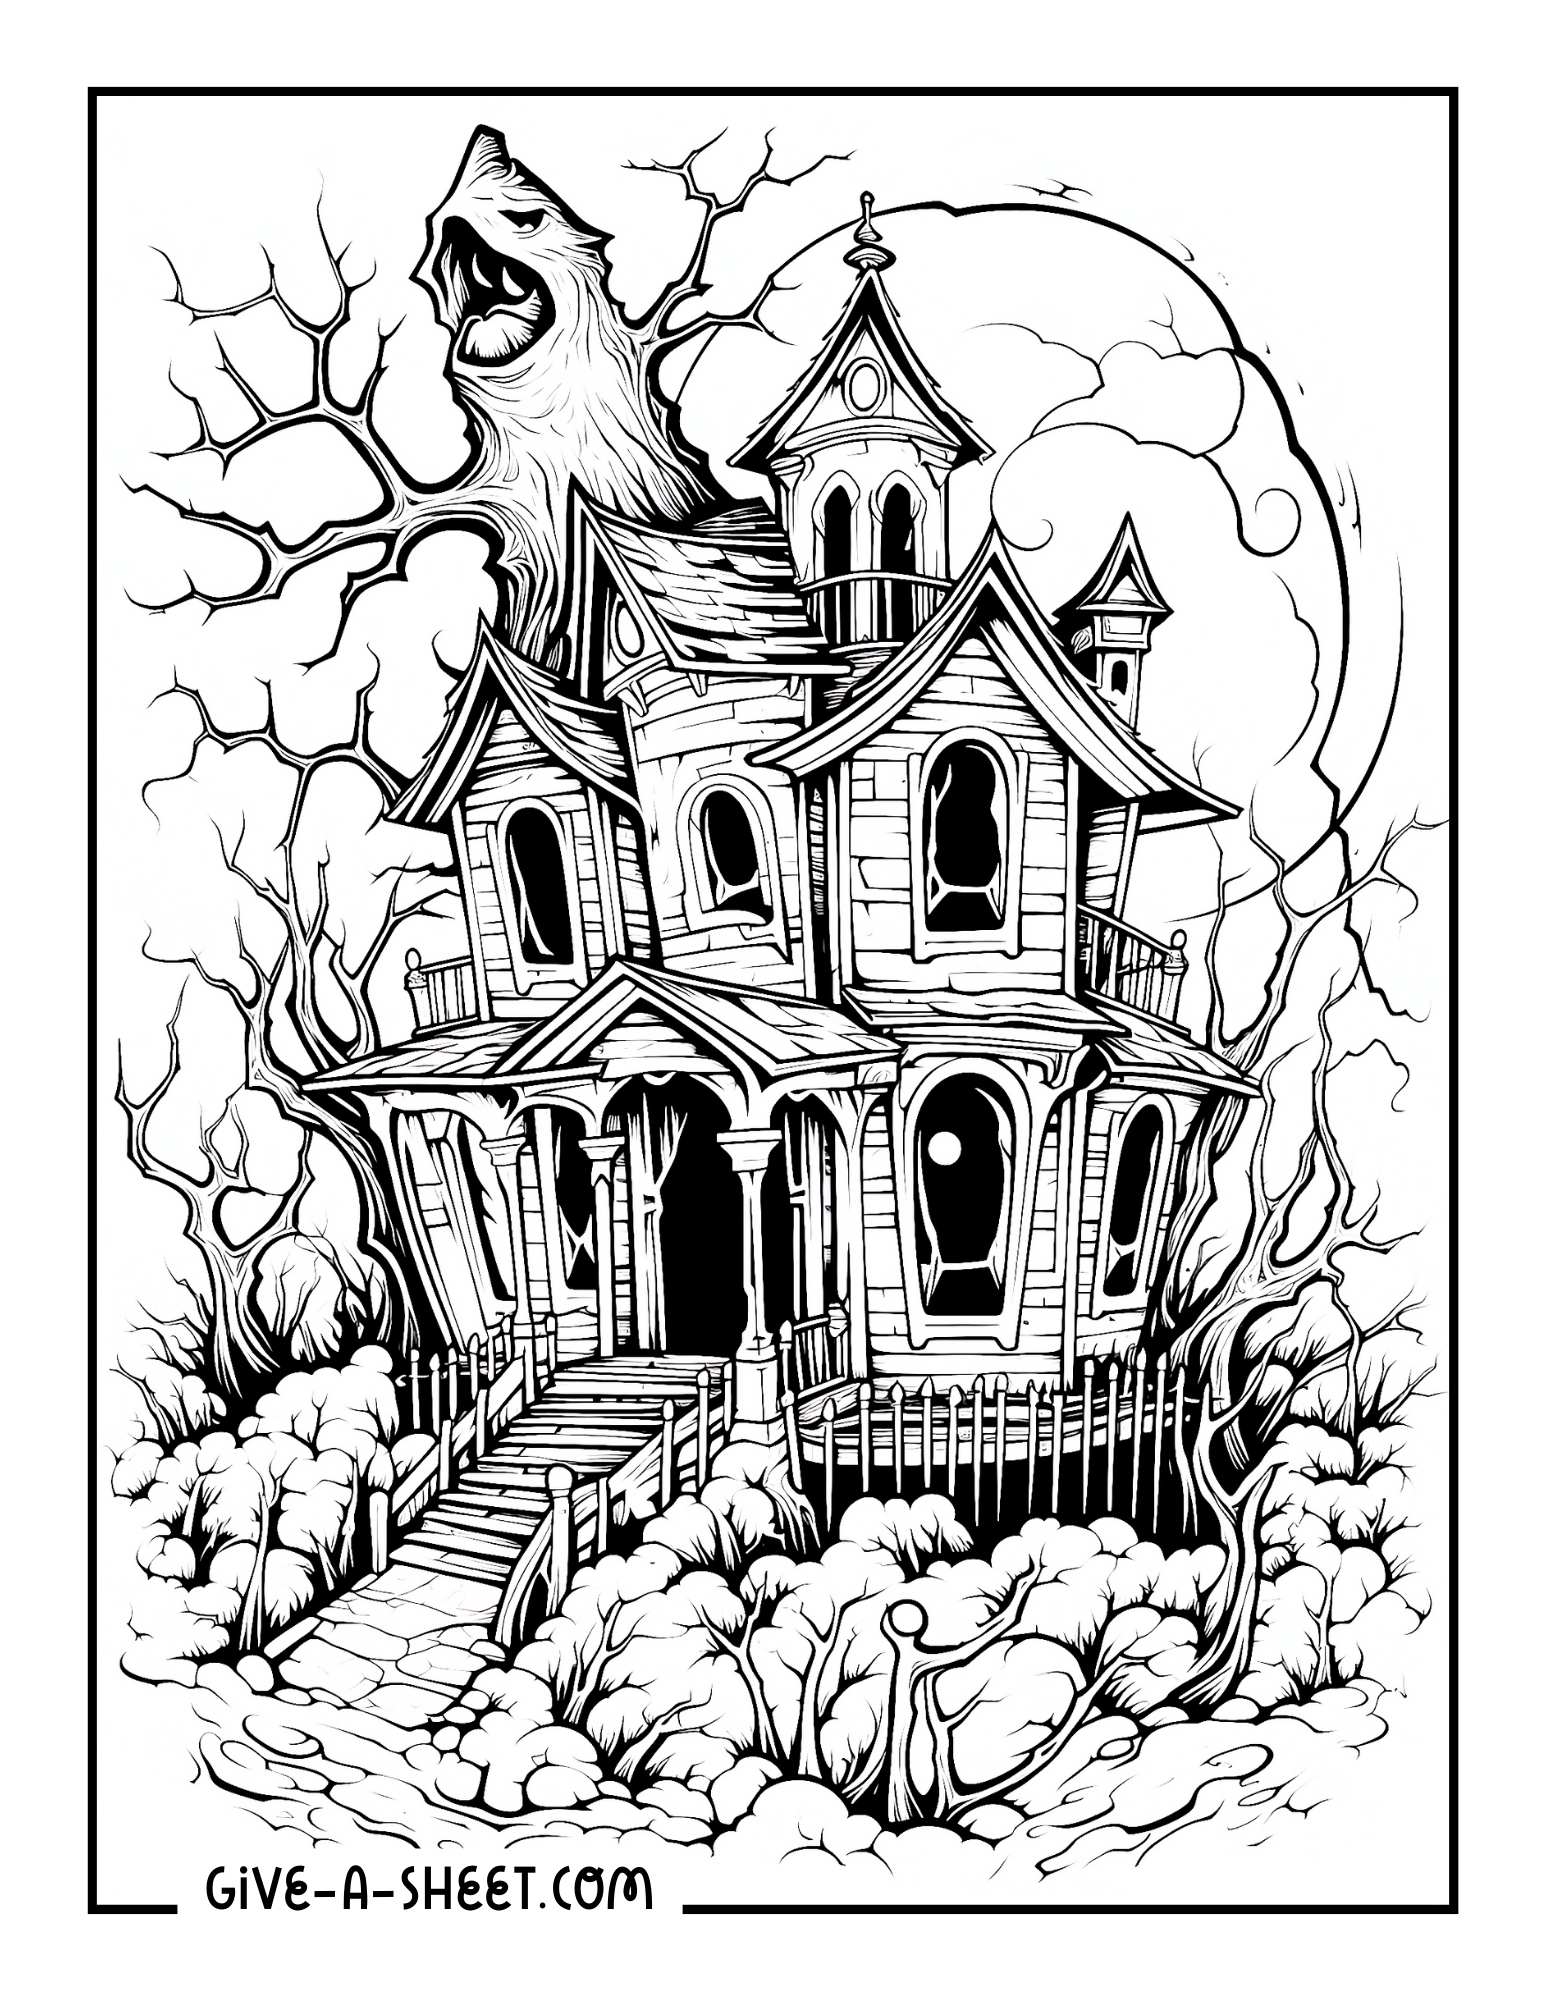 Haunted house during a full moon coloring page for adults.